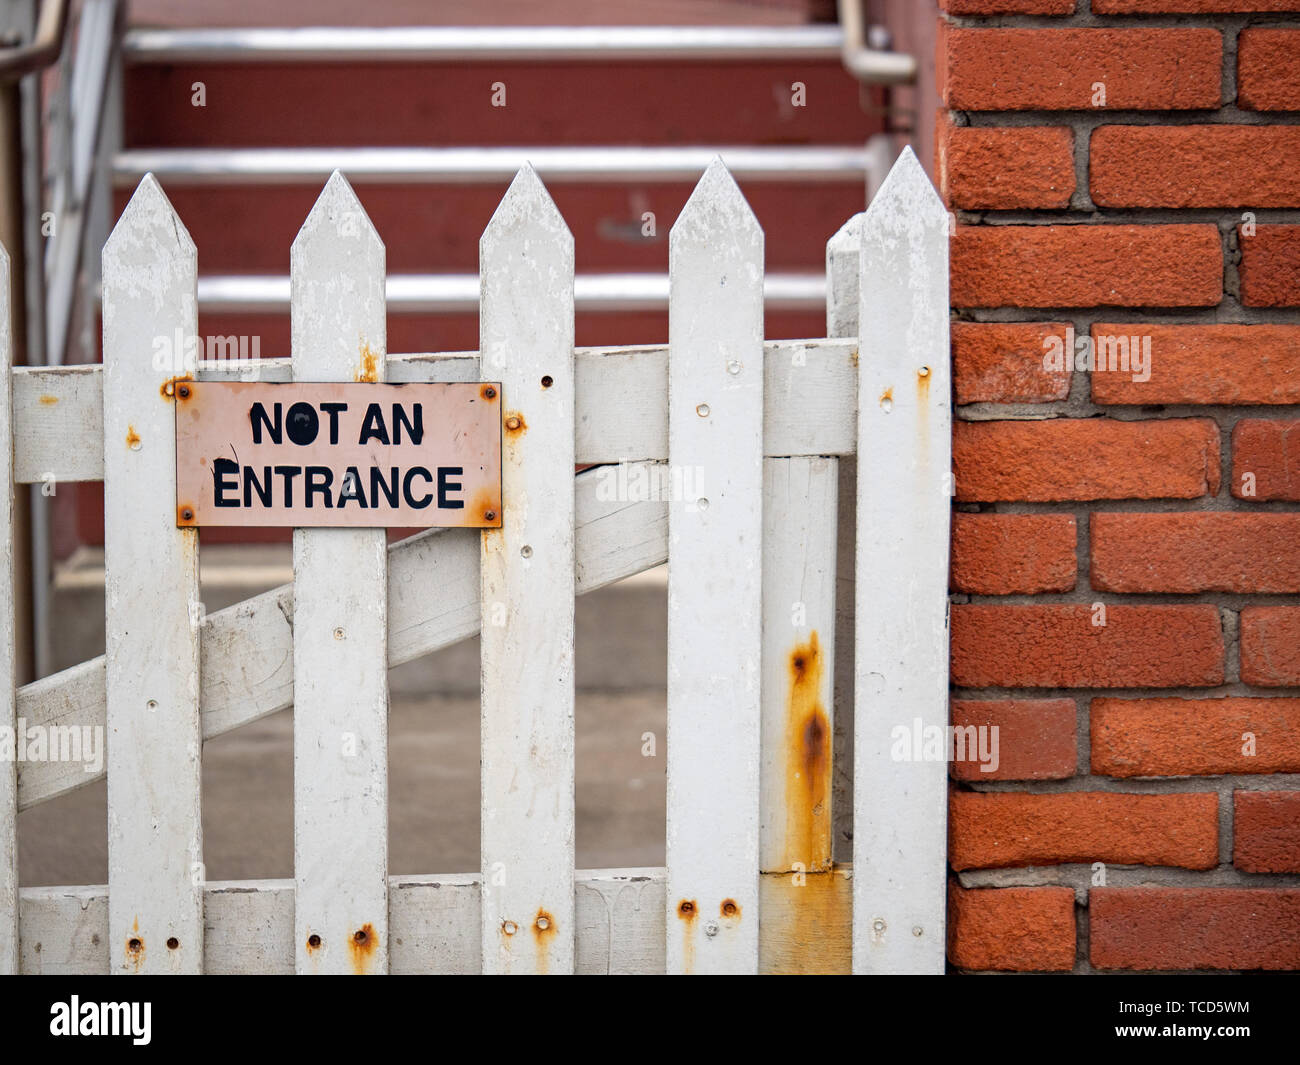 Not an entrance sign on white picket fence with rusted parts on brick building Stock Photo